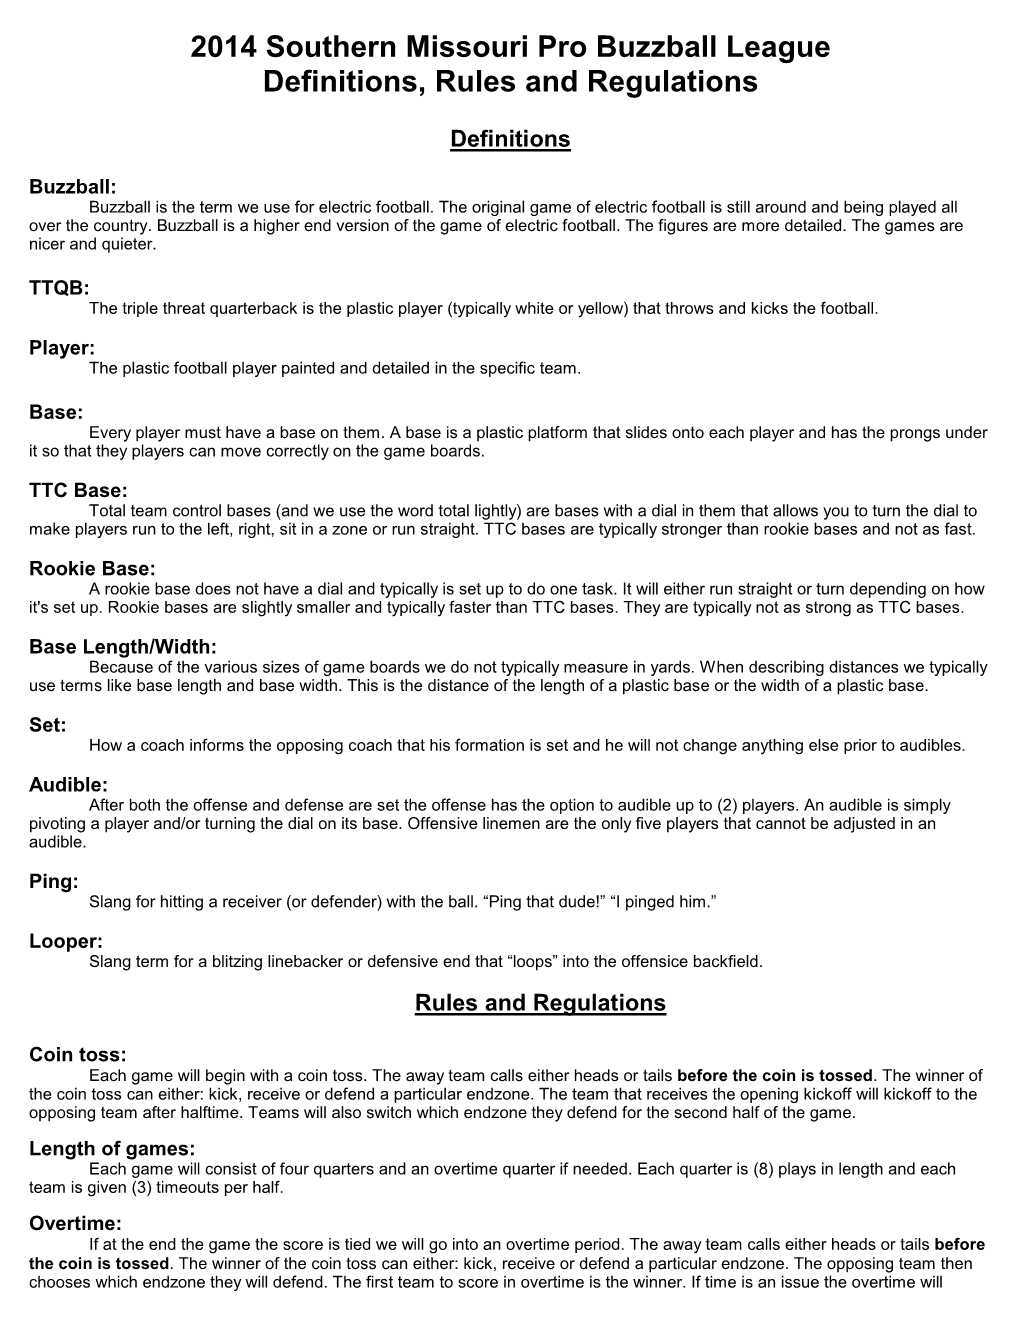 2014 Southern Missouri Pro Buzzball League Definitions, Rules and Regulations